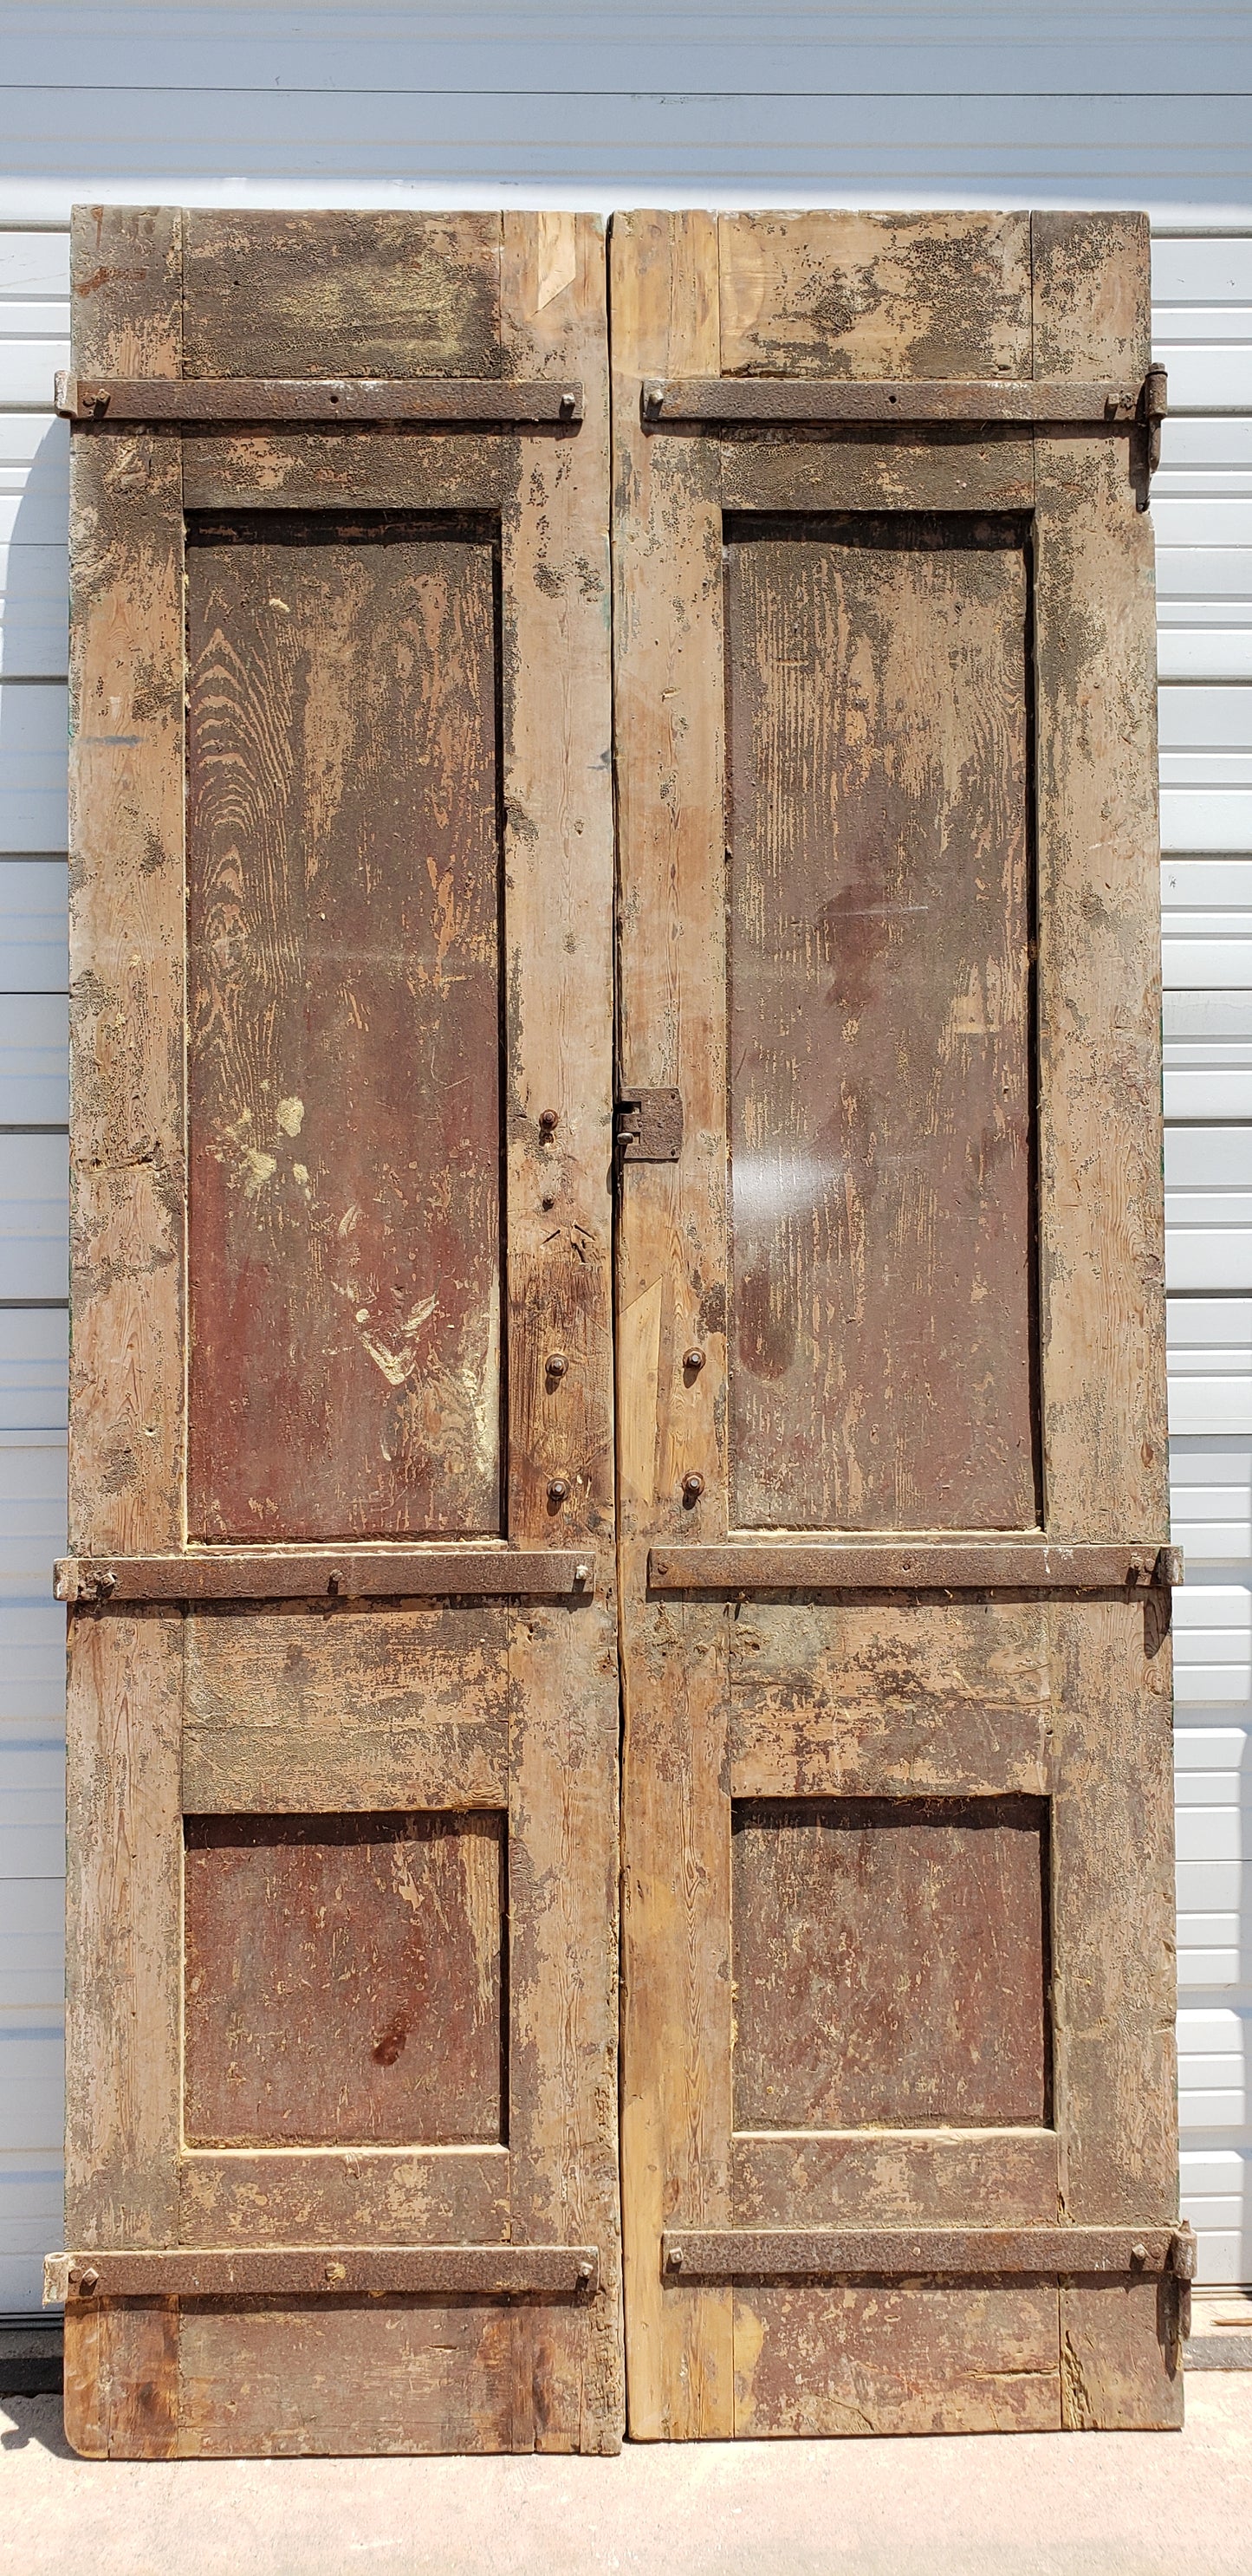 Pair of Green Washed Antique Carved Wood Doors